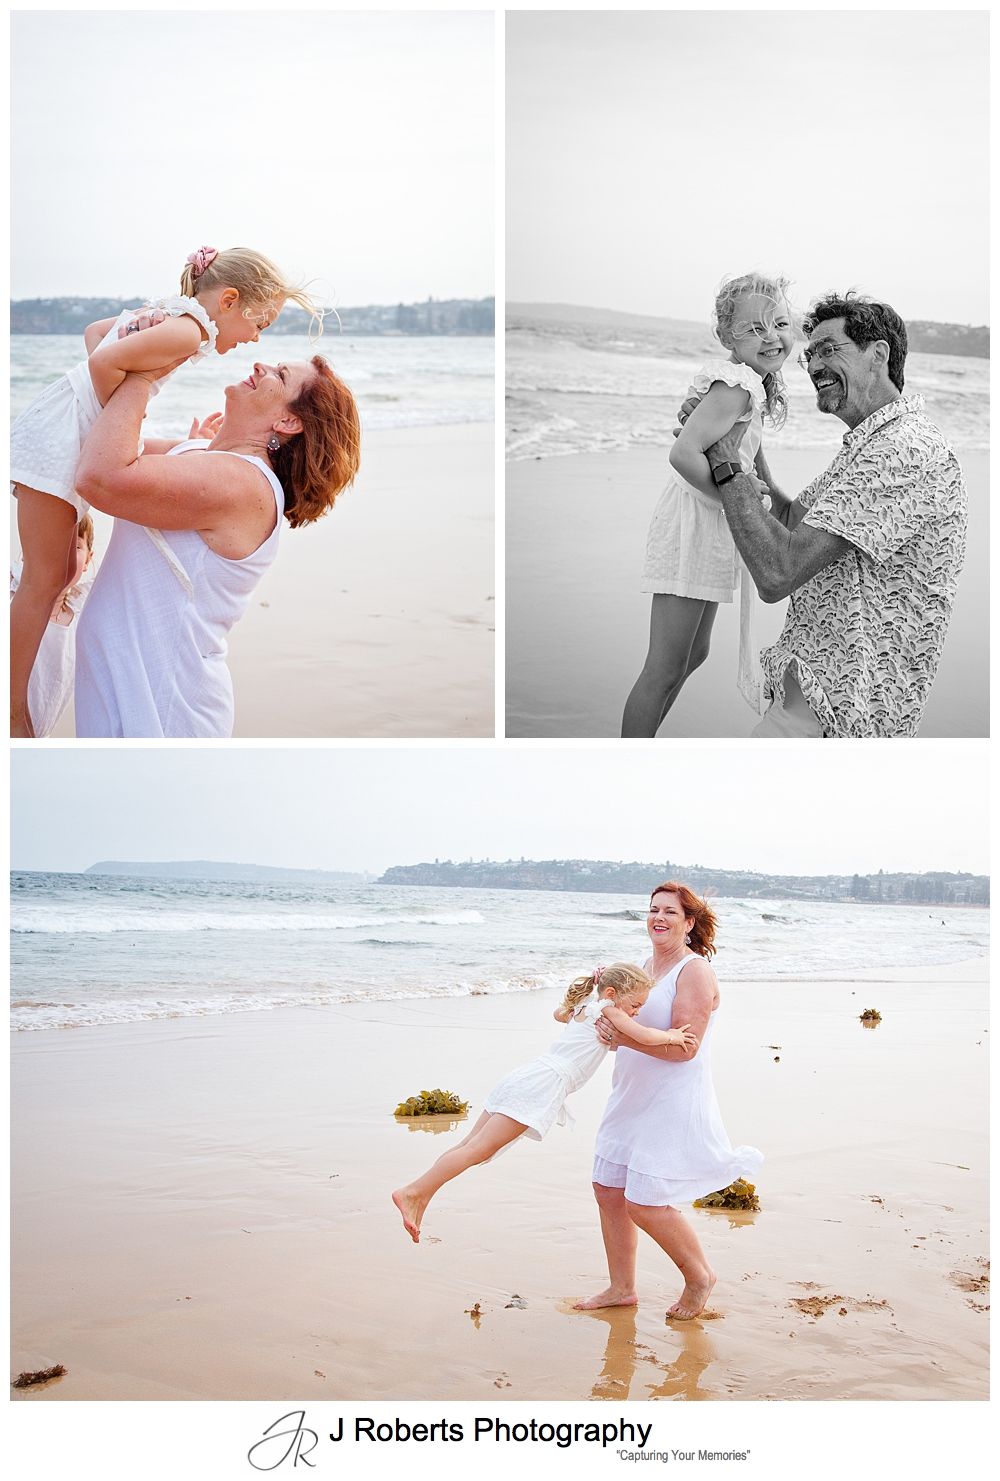 Family portrait photography on Sydneys northern beaches at Long Reef Beach